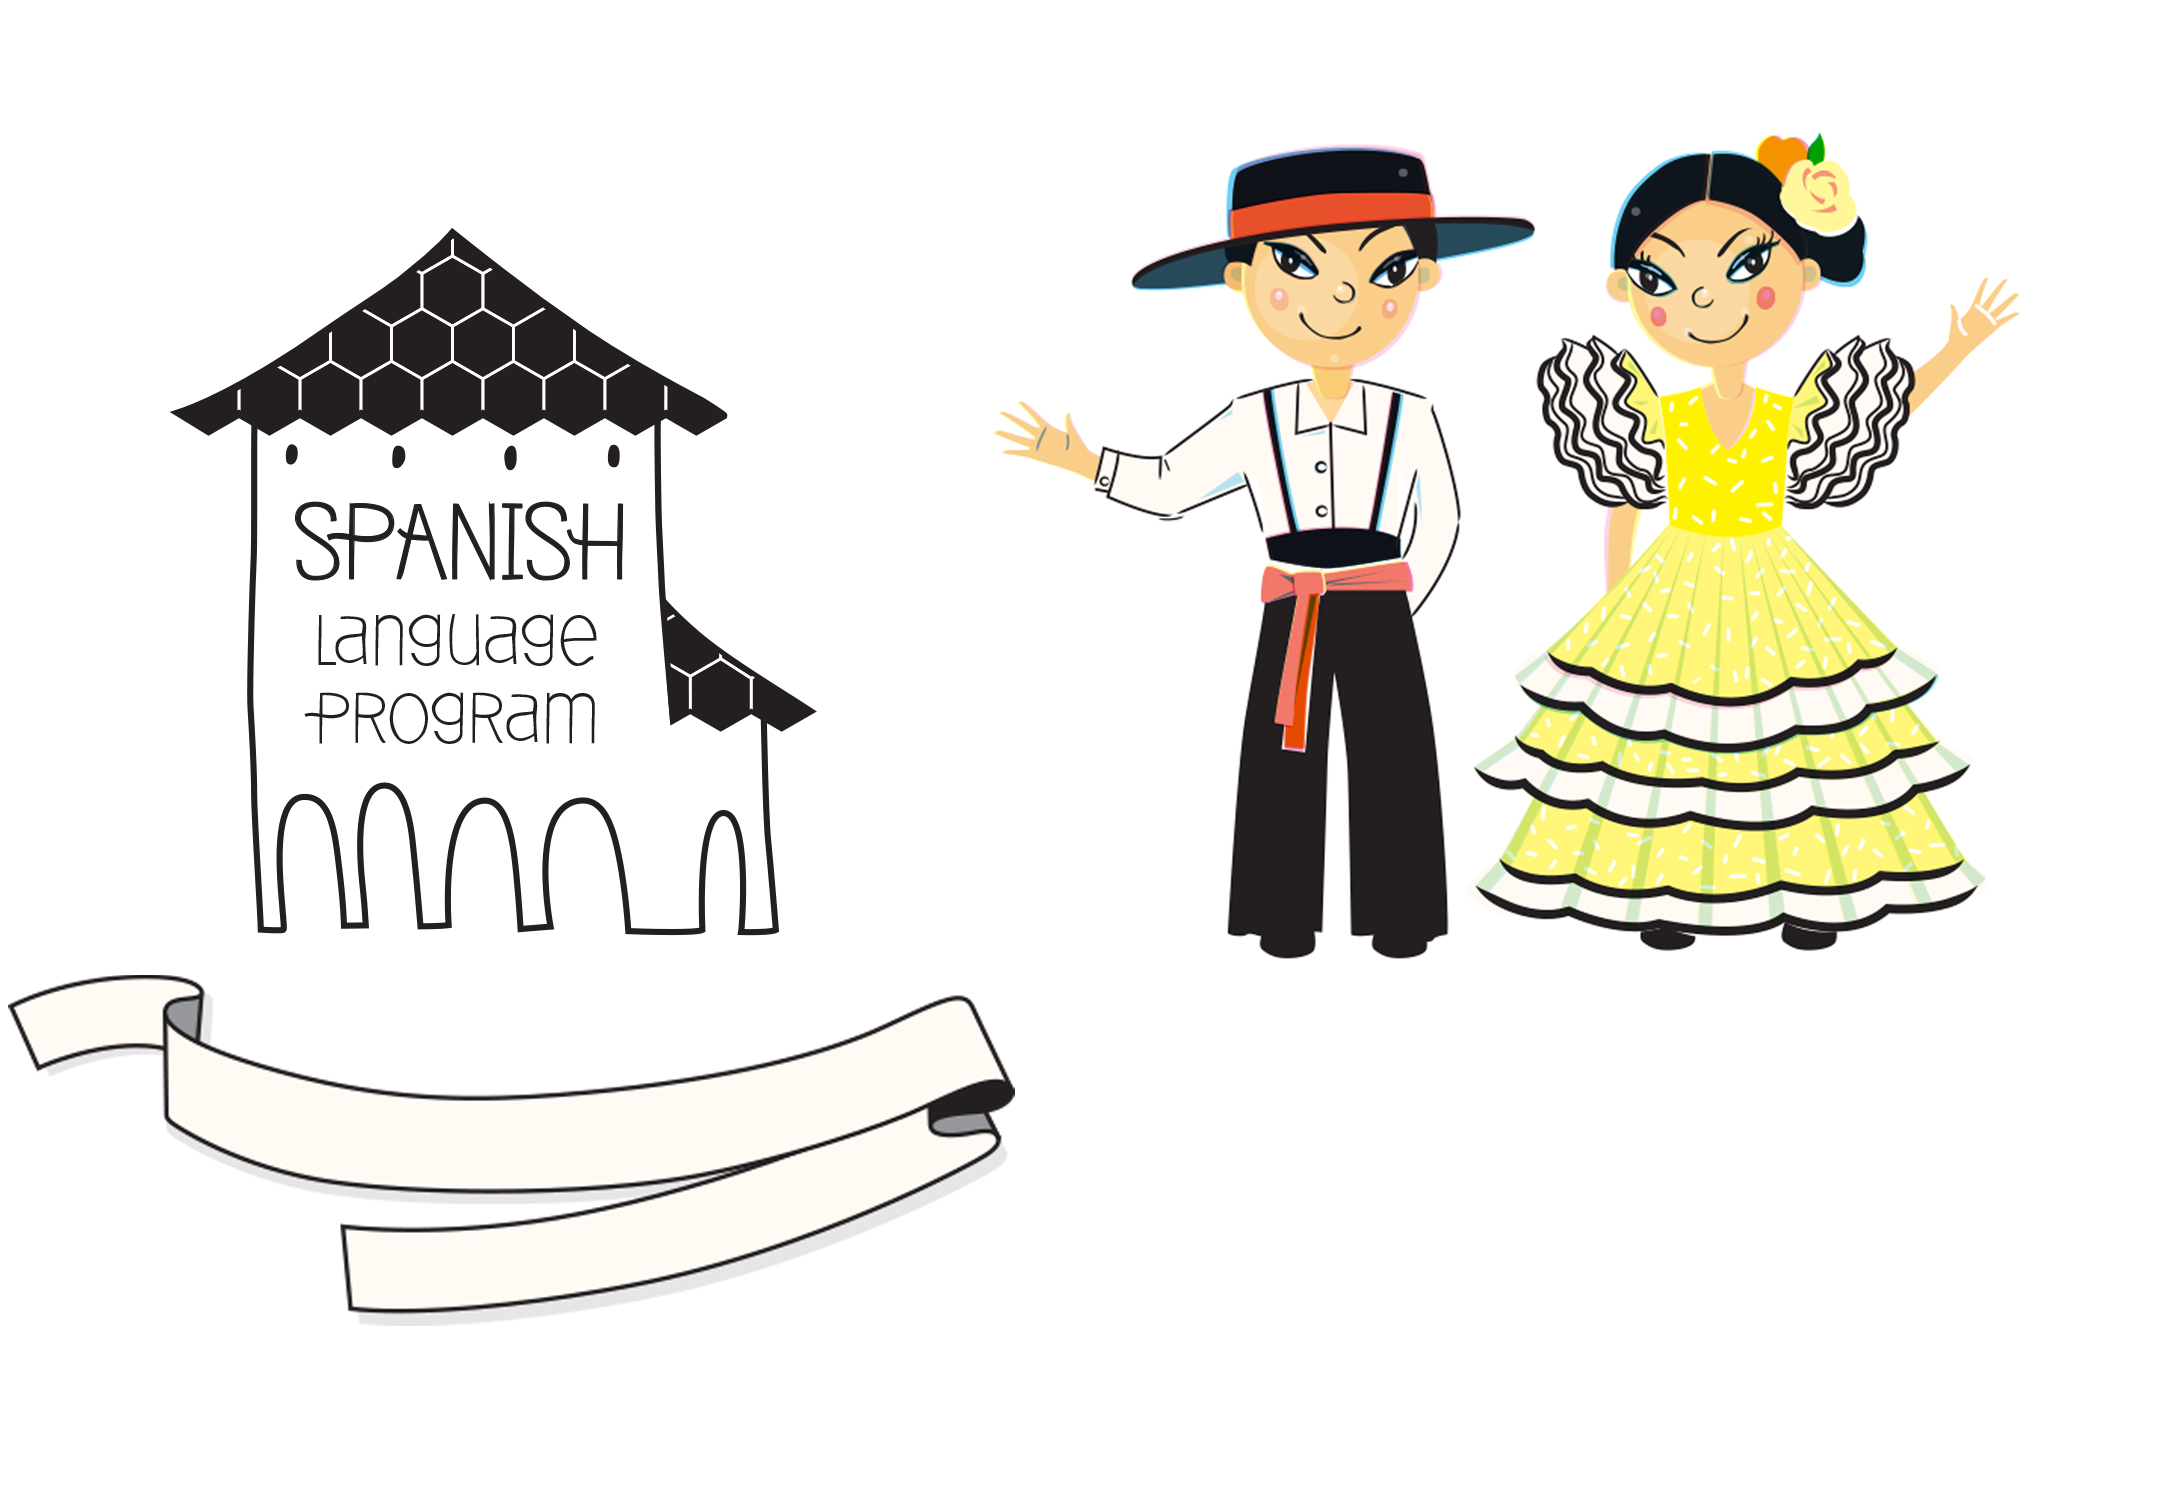  JOB: Branding elements for Spanish Language Program CLIENT: Newlands Primary School BRIEF: Design of logo and characters to be used across materials to promote the introduction of a new language to the school. FONT: A big thank you to Joan Ramon Pas